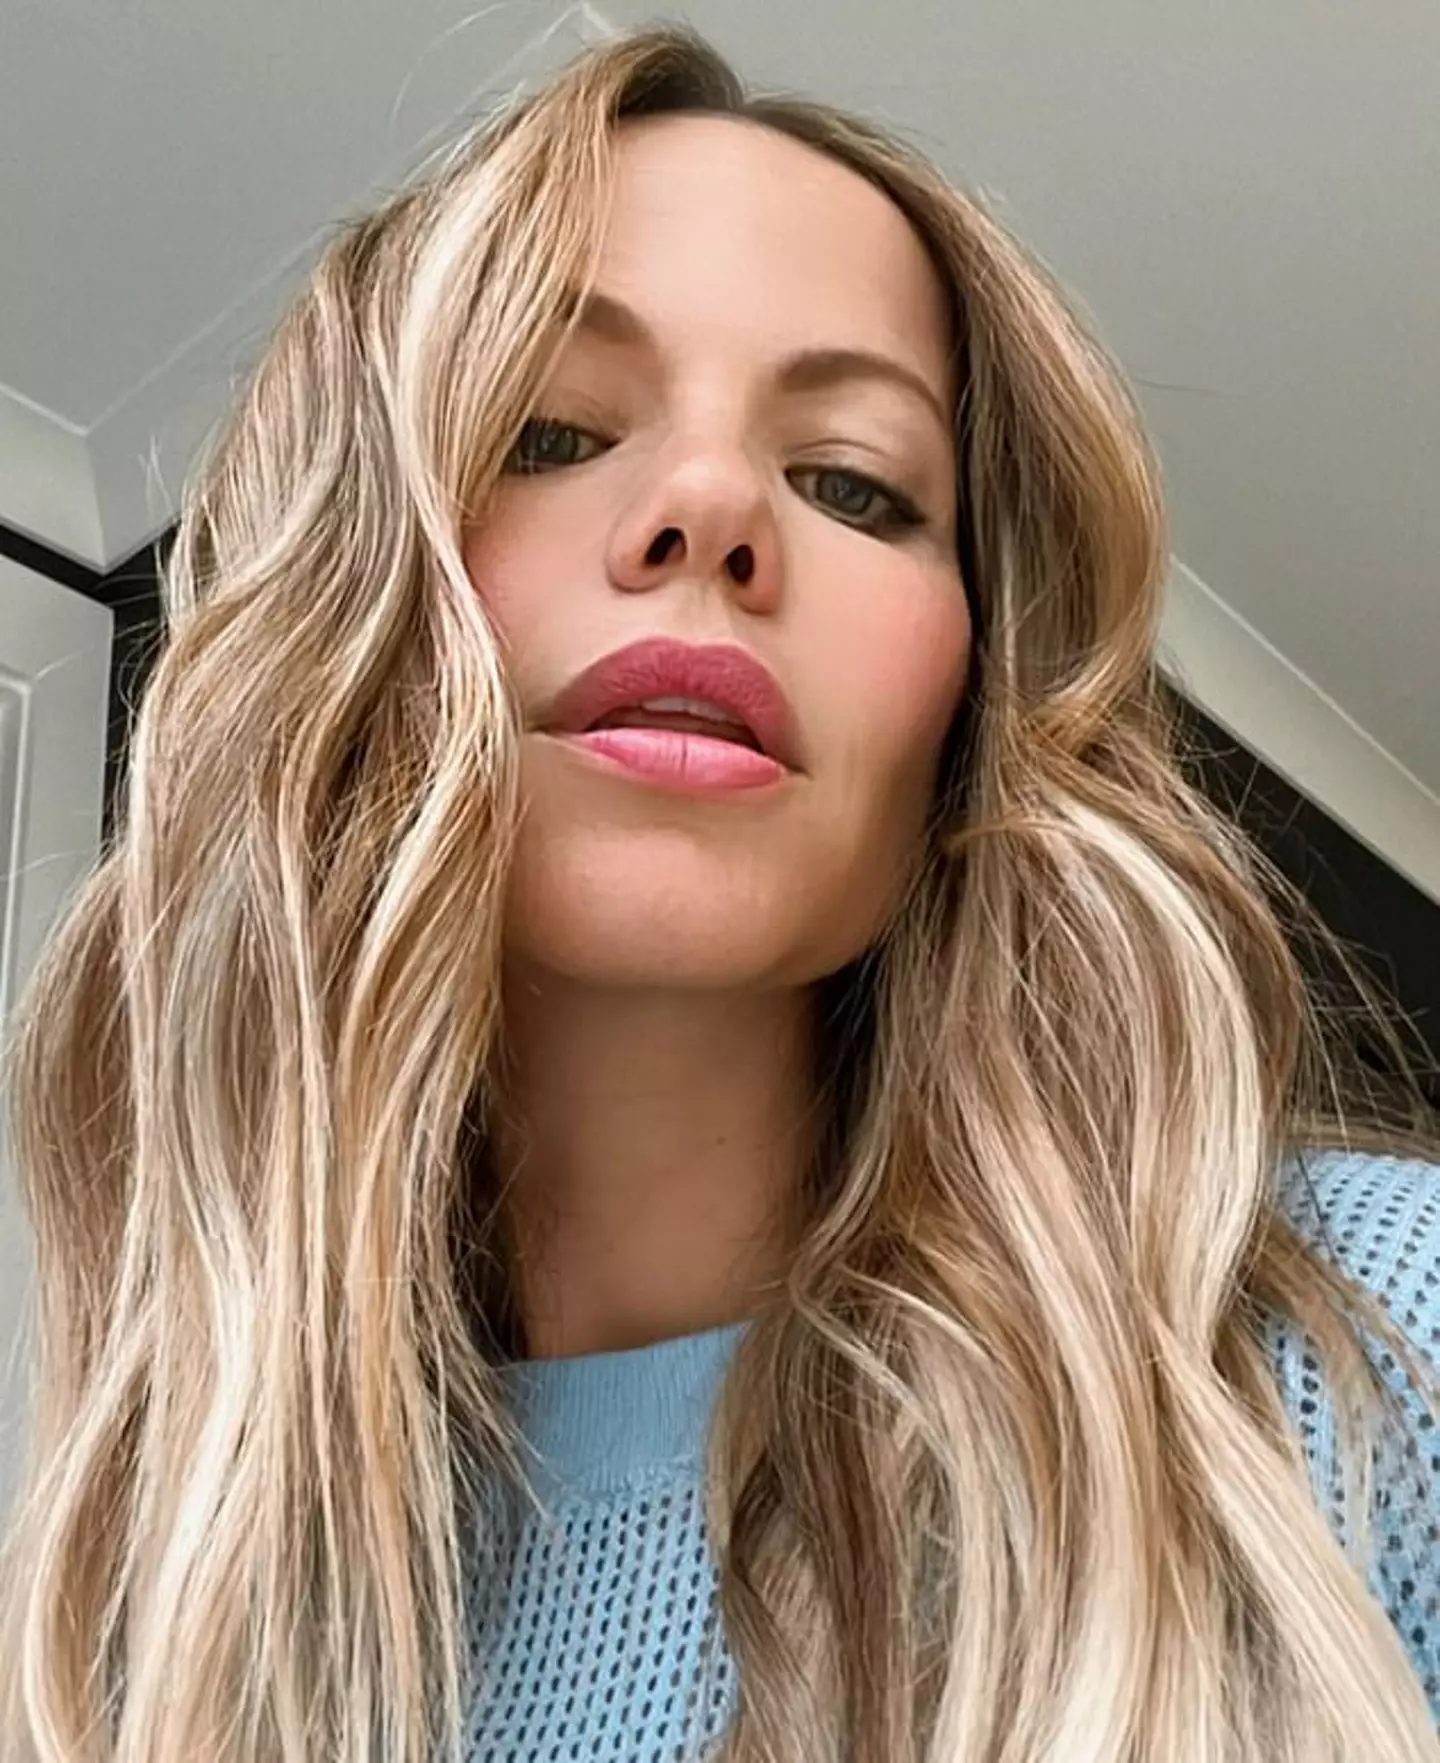 Former Home And Away star Tammin Sursok has called out influencers who film themselves crying on social media.